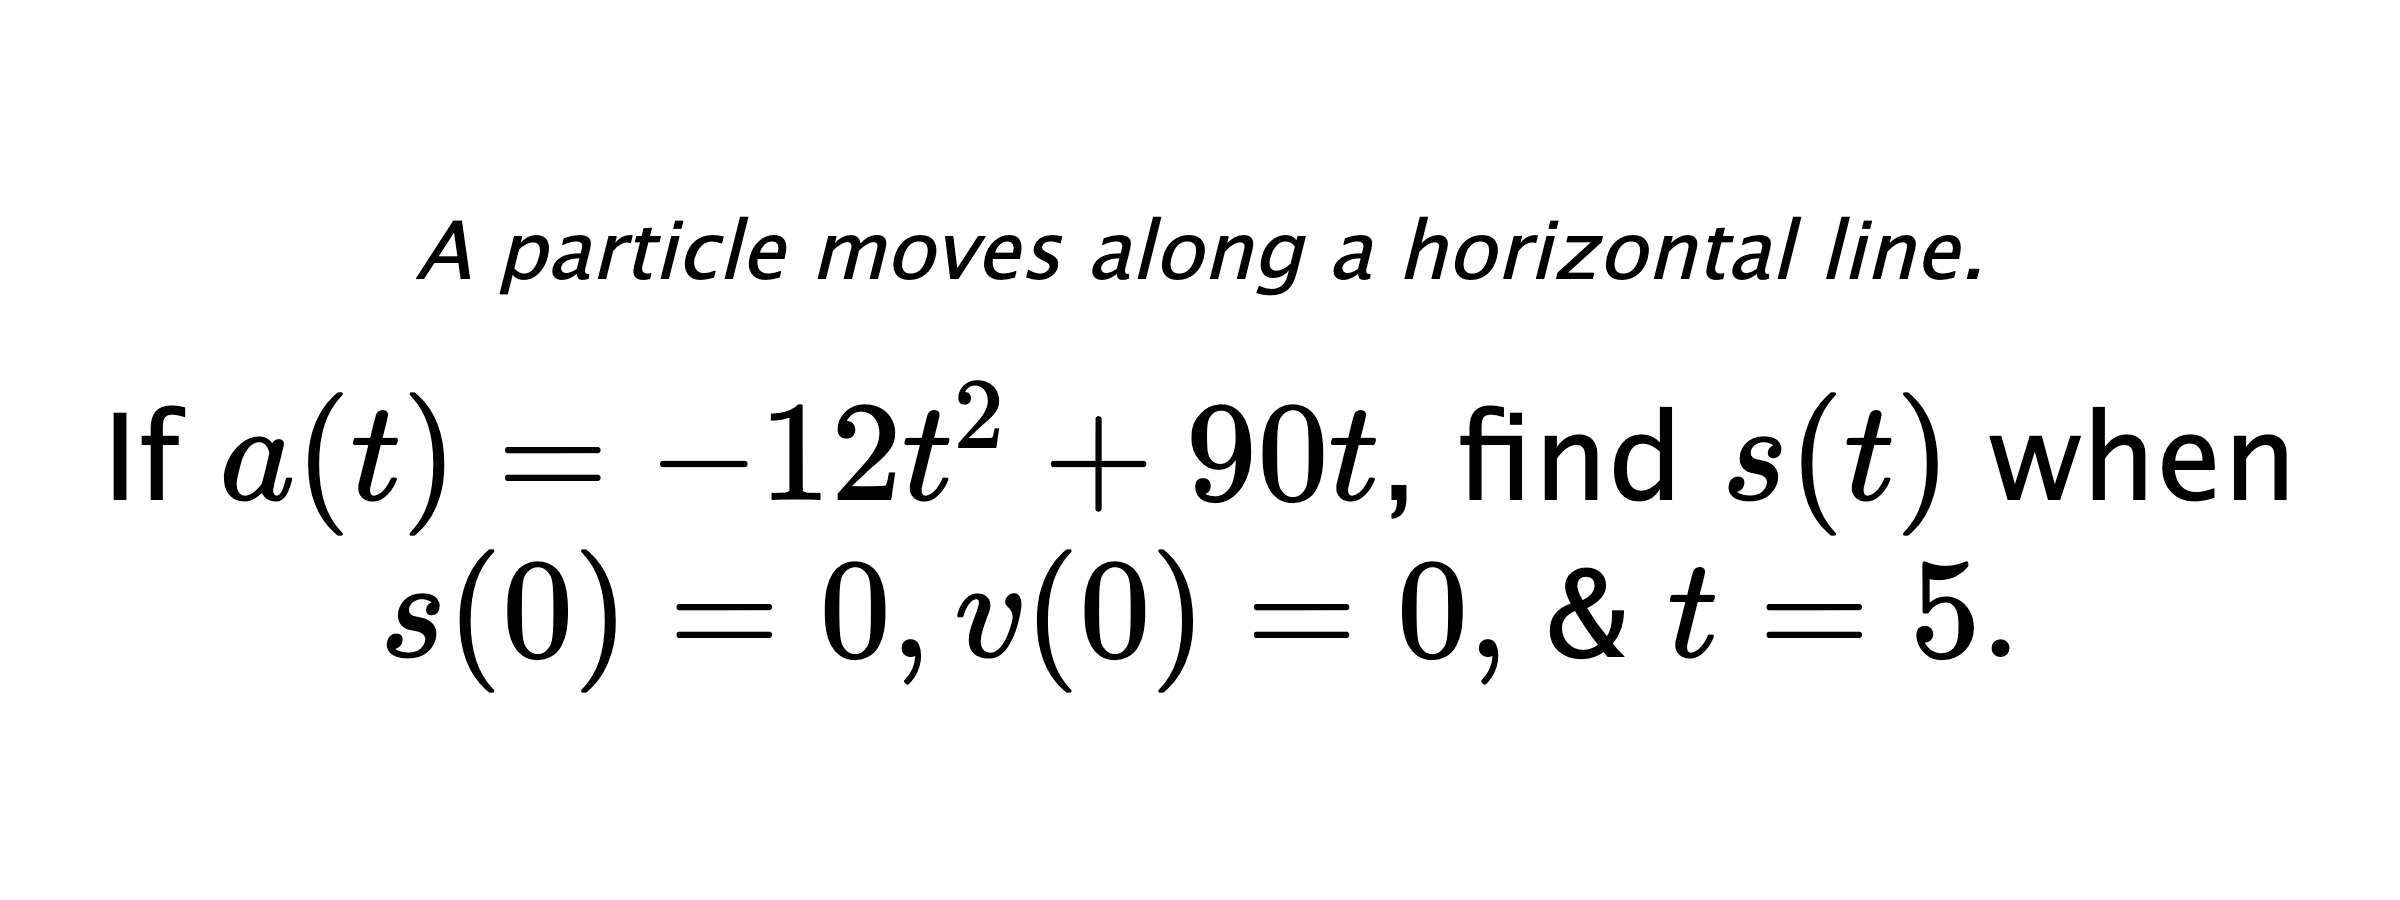 A particle moves along a horizontal line. If $ a(t)=-12t^2+90t $, find $ s(t) $ when $ s(0)=0, v(0)=0, $ & $ t=5 .$